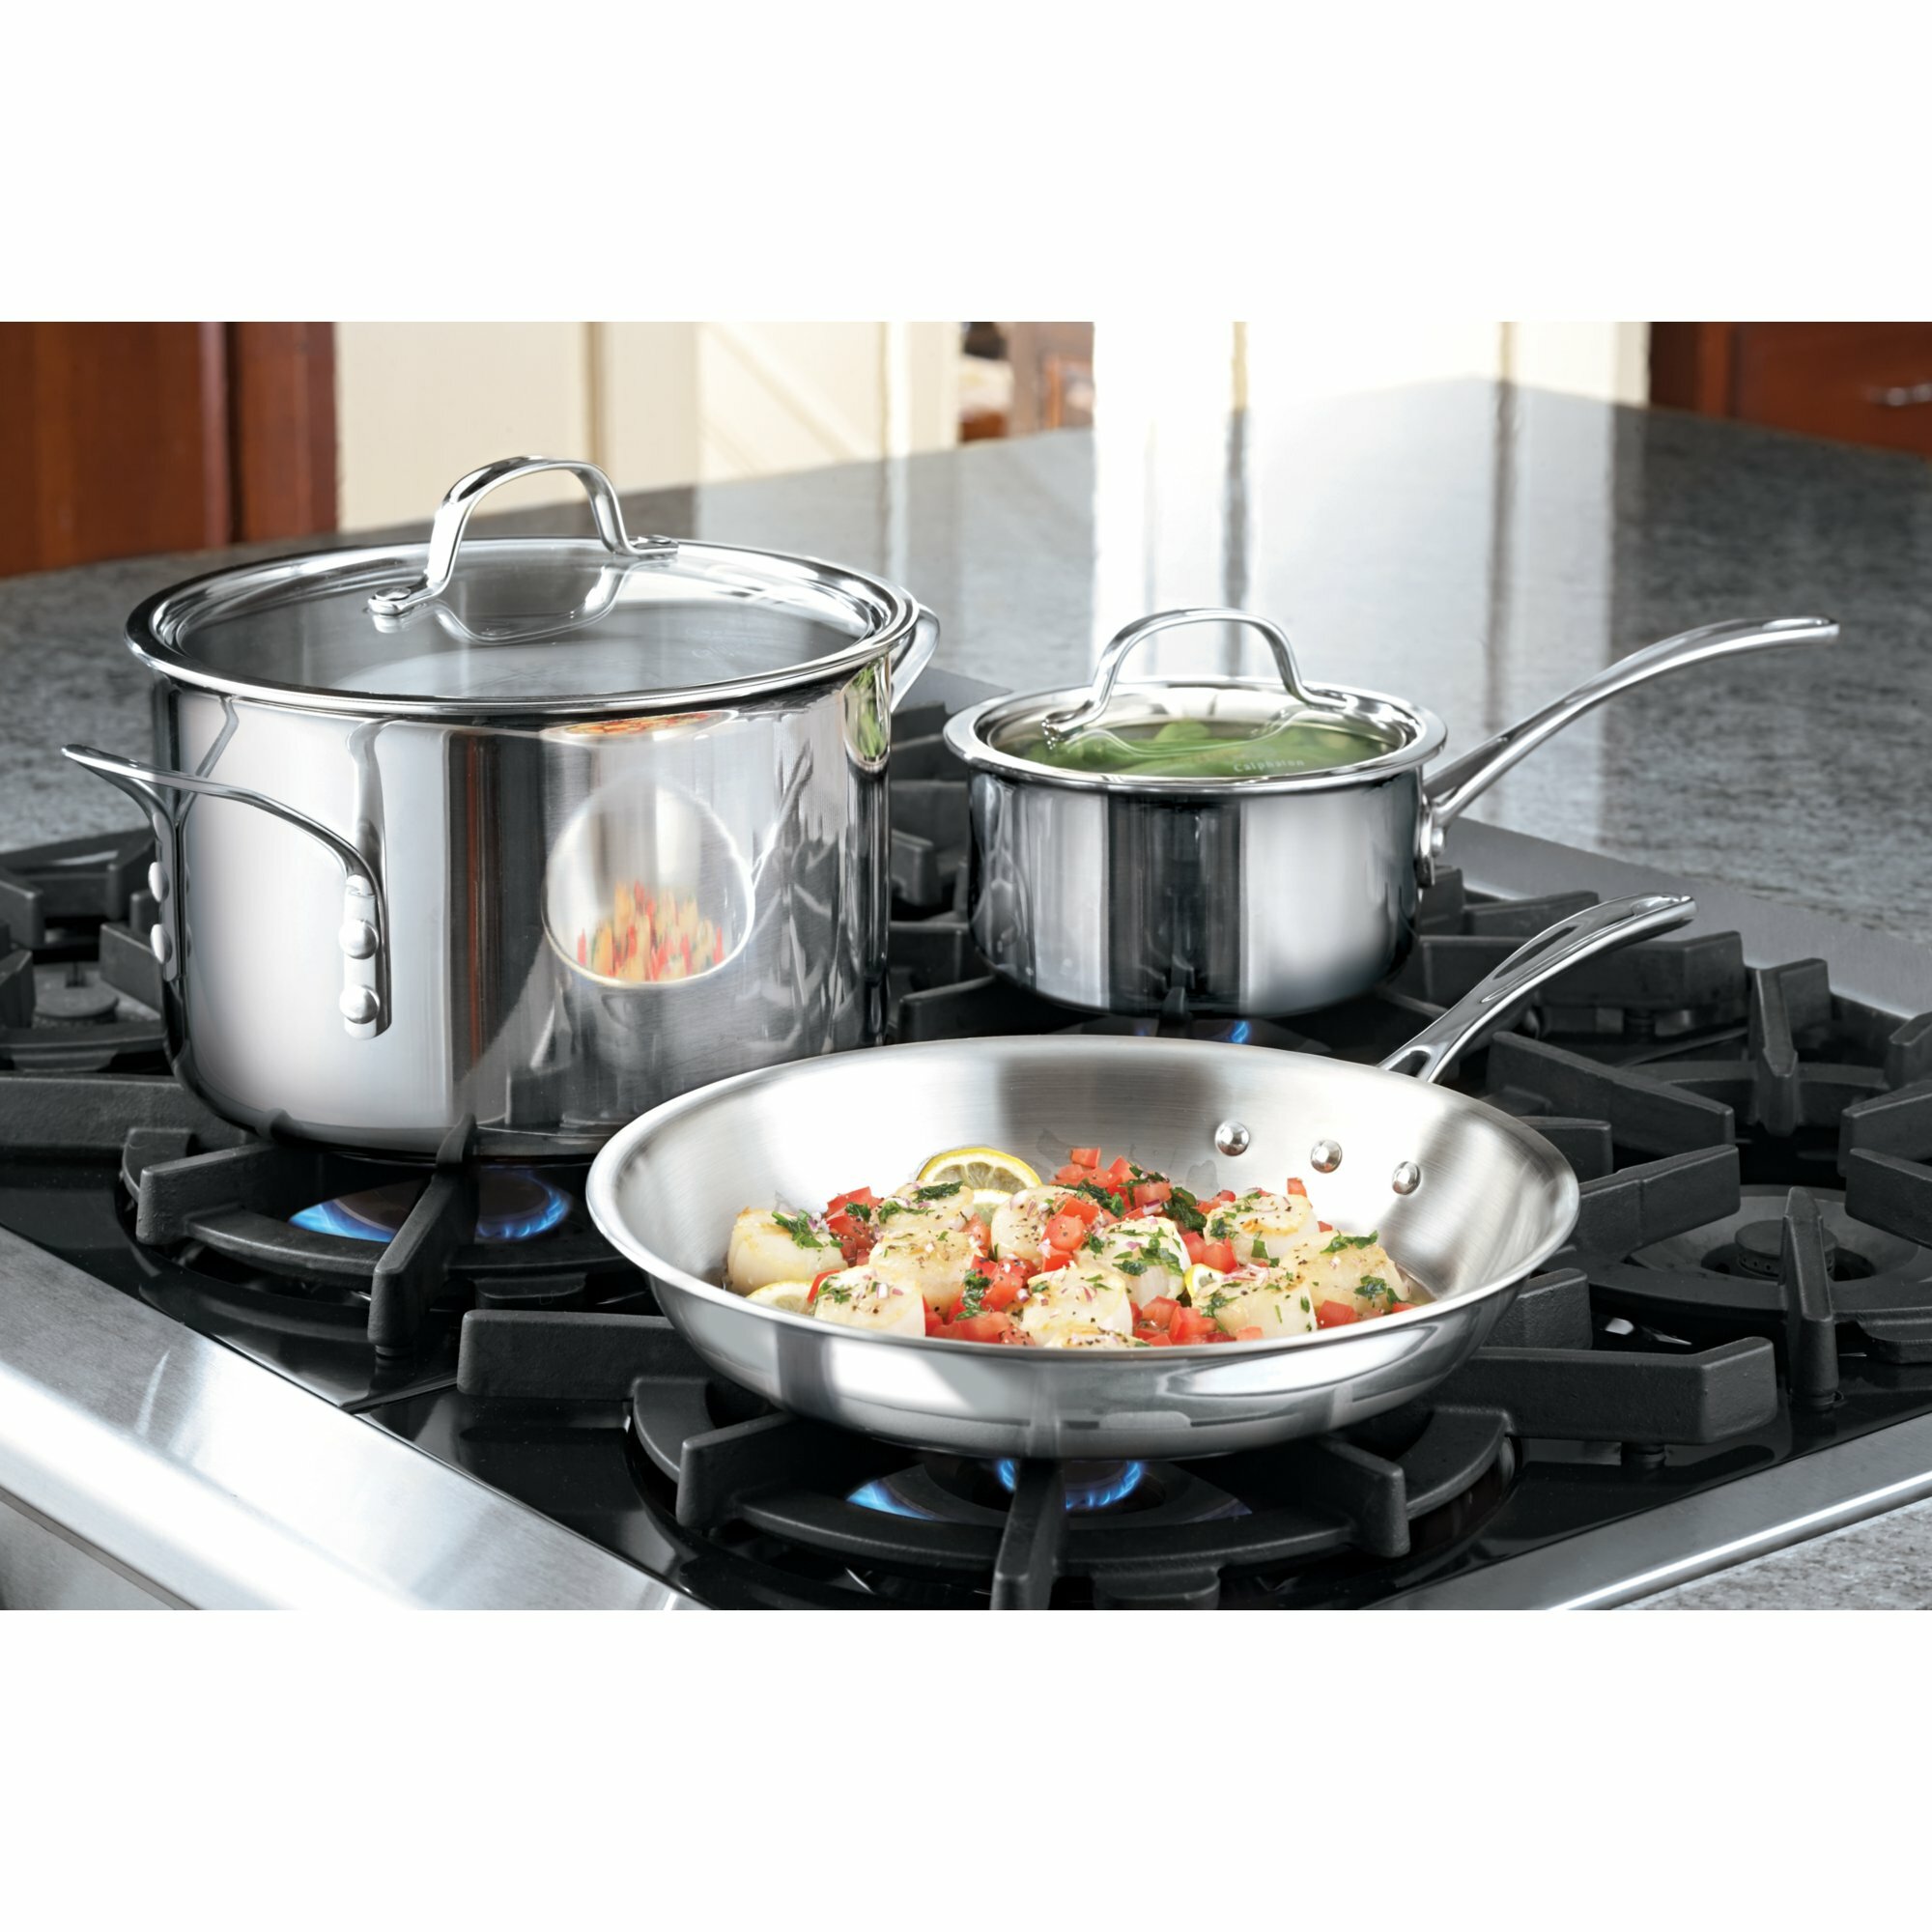 Calphalon Tri-Ply Stainless Steel 8 Piece Cookware Set & Reviews | Wayfair Calphalon Tri Ply Stainless Steel Cookware